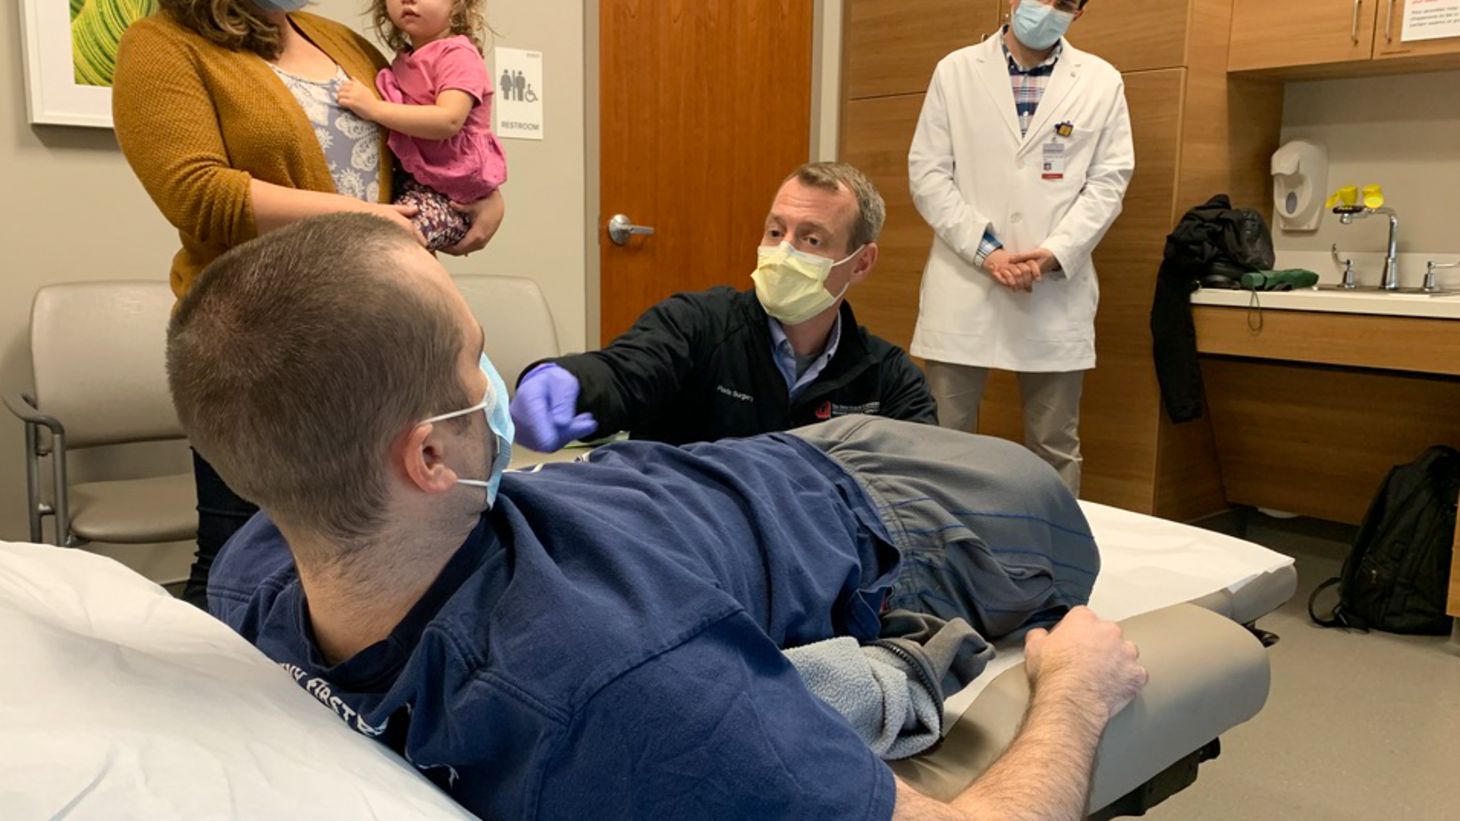 Dr. Jason Souza examines Nick Vogt at The Ohio State University Wexner Medical Center to assess his recovery after surgery